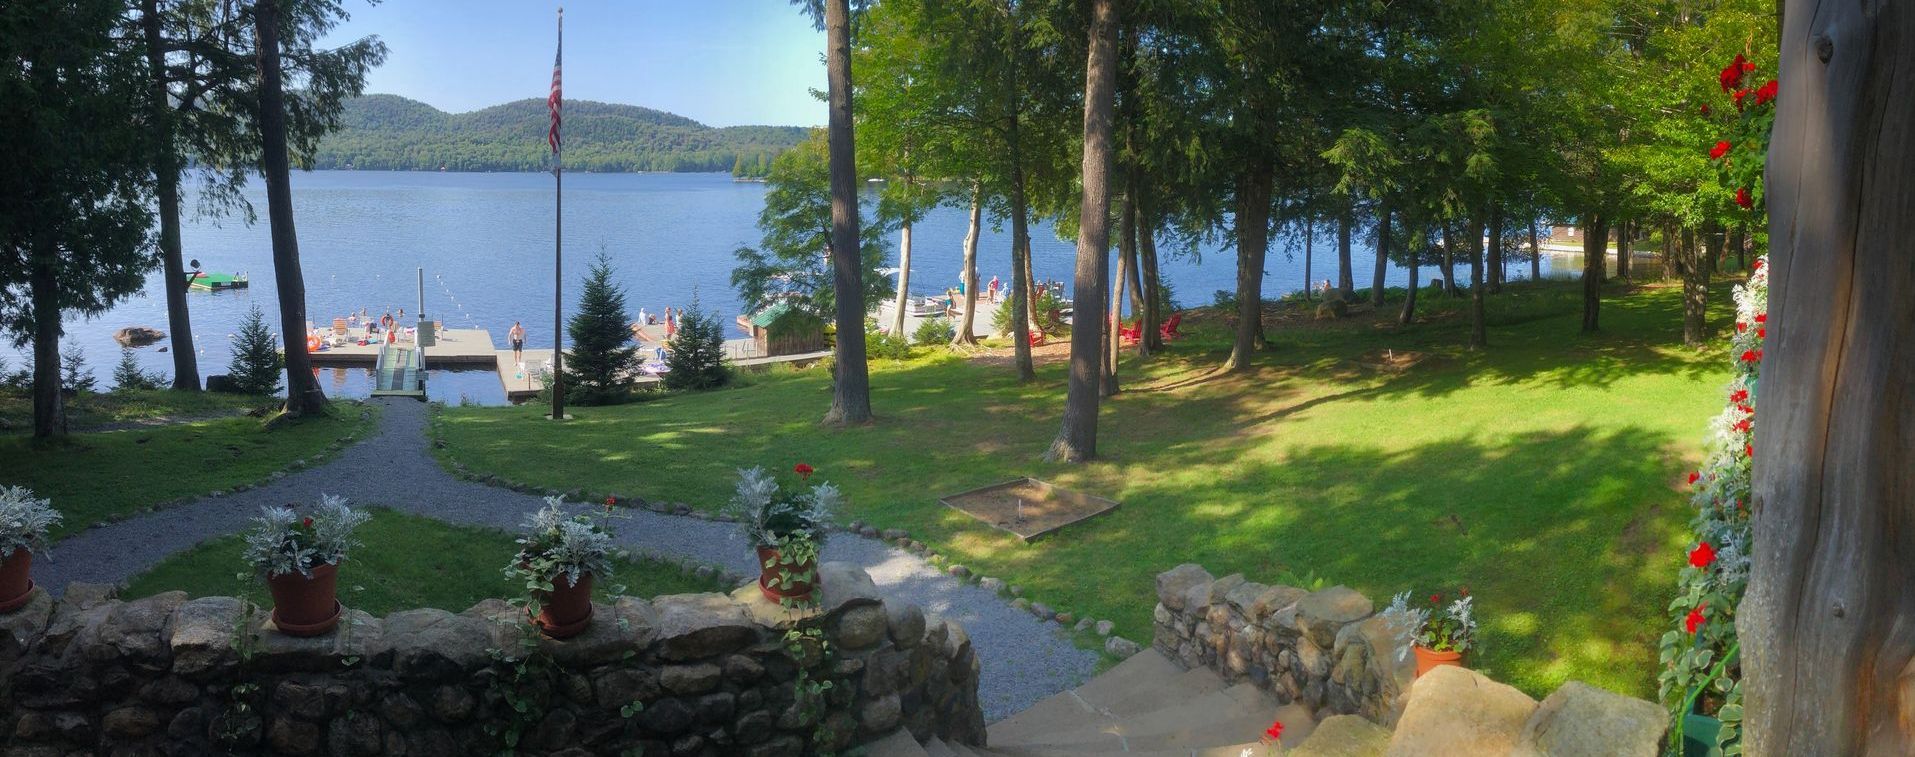 a view of a lake from a porch of a large building.